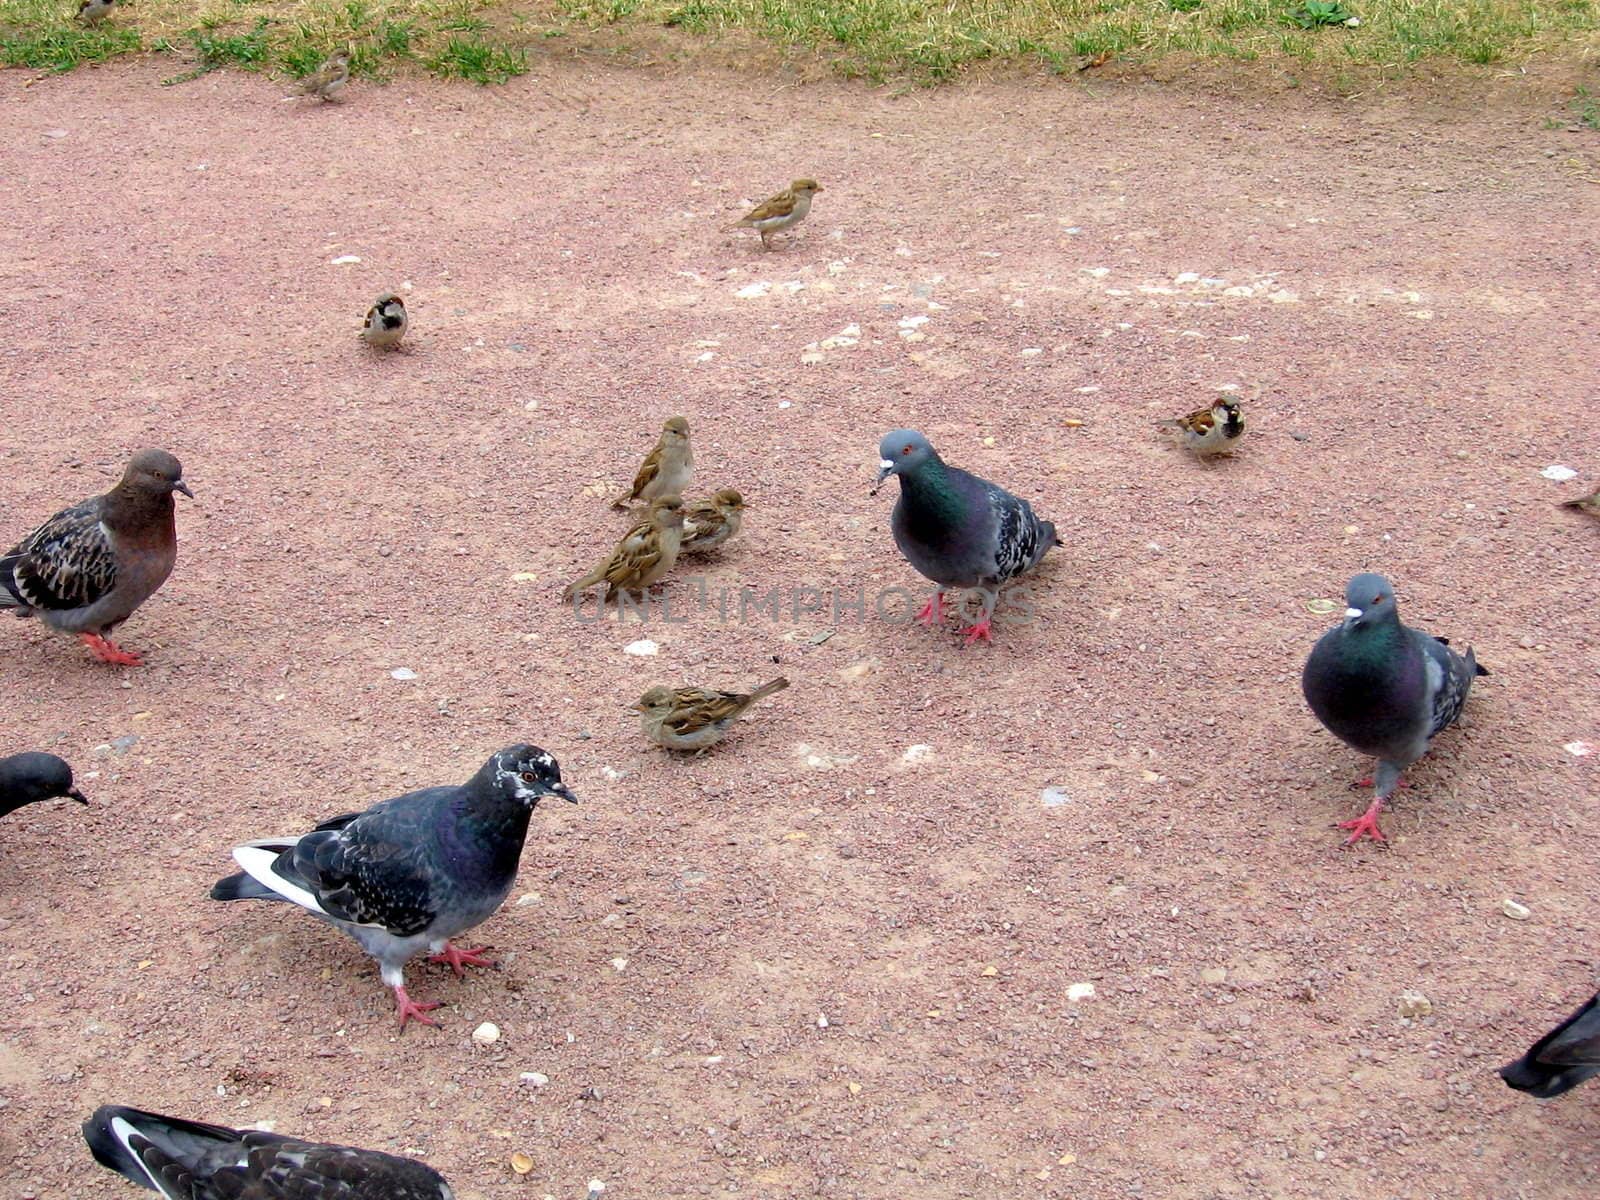 The urban birds are sparrows and pigeons